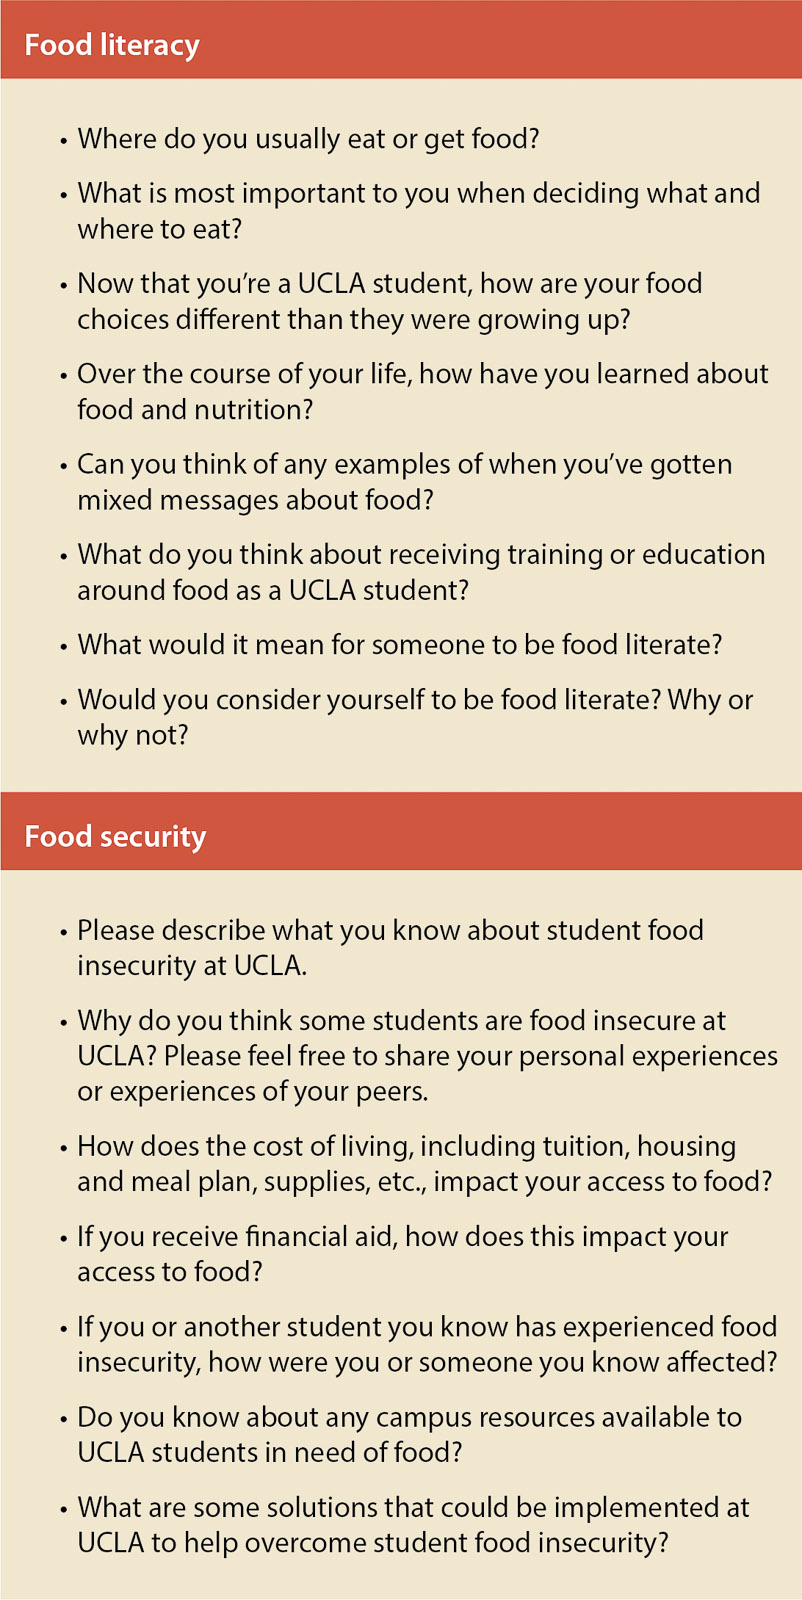 Focus group questions used to guide discussions with students about food literacy and food insecurity at UCLA.